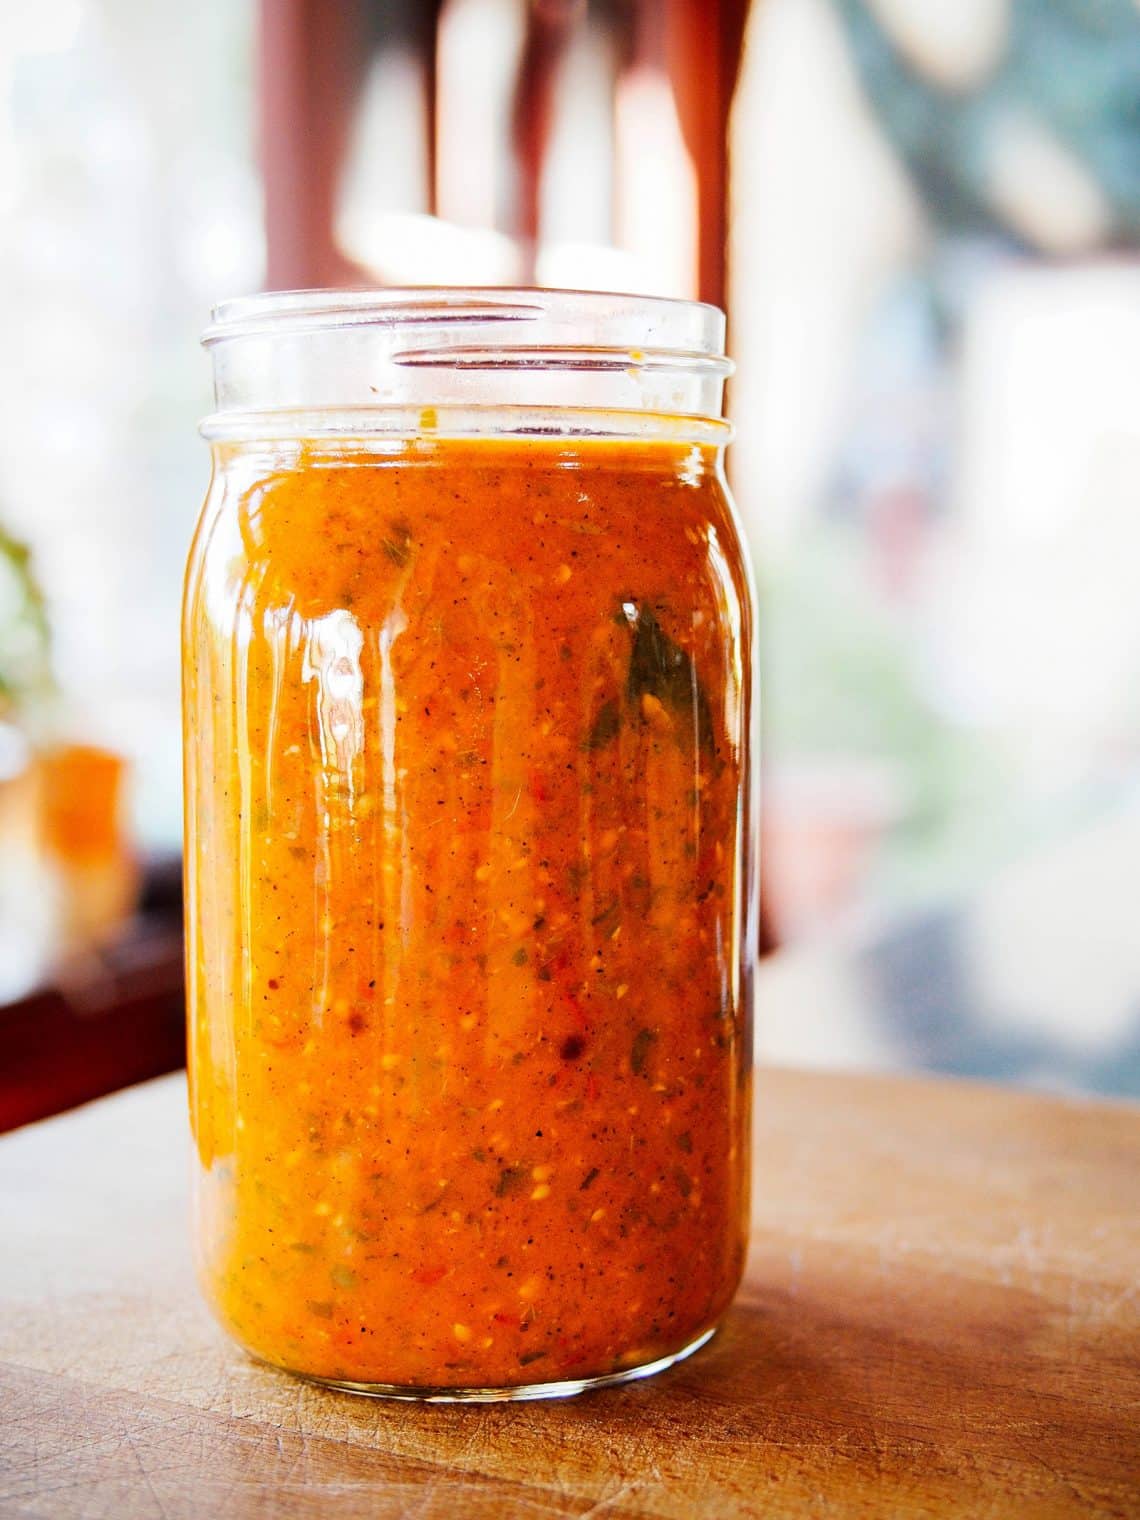 Spicy minty tomato sauce infused with tomato leaves